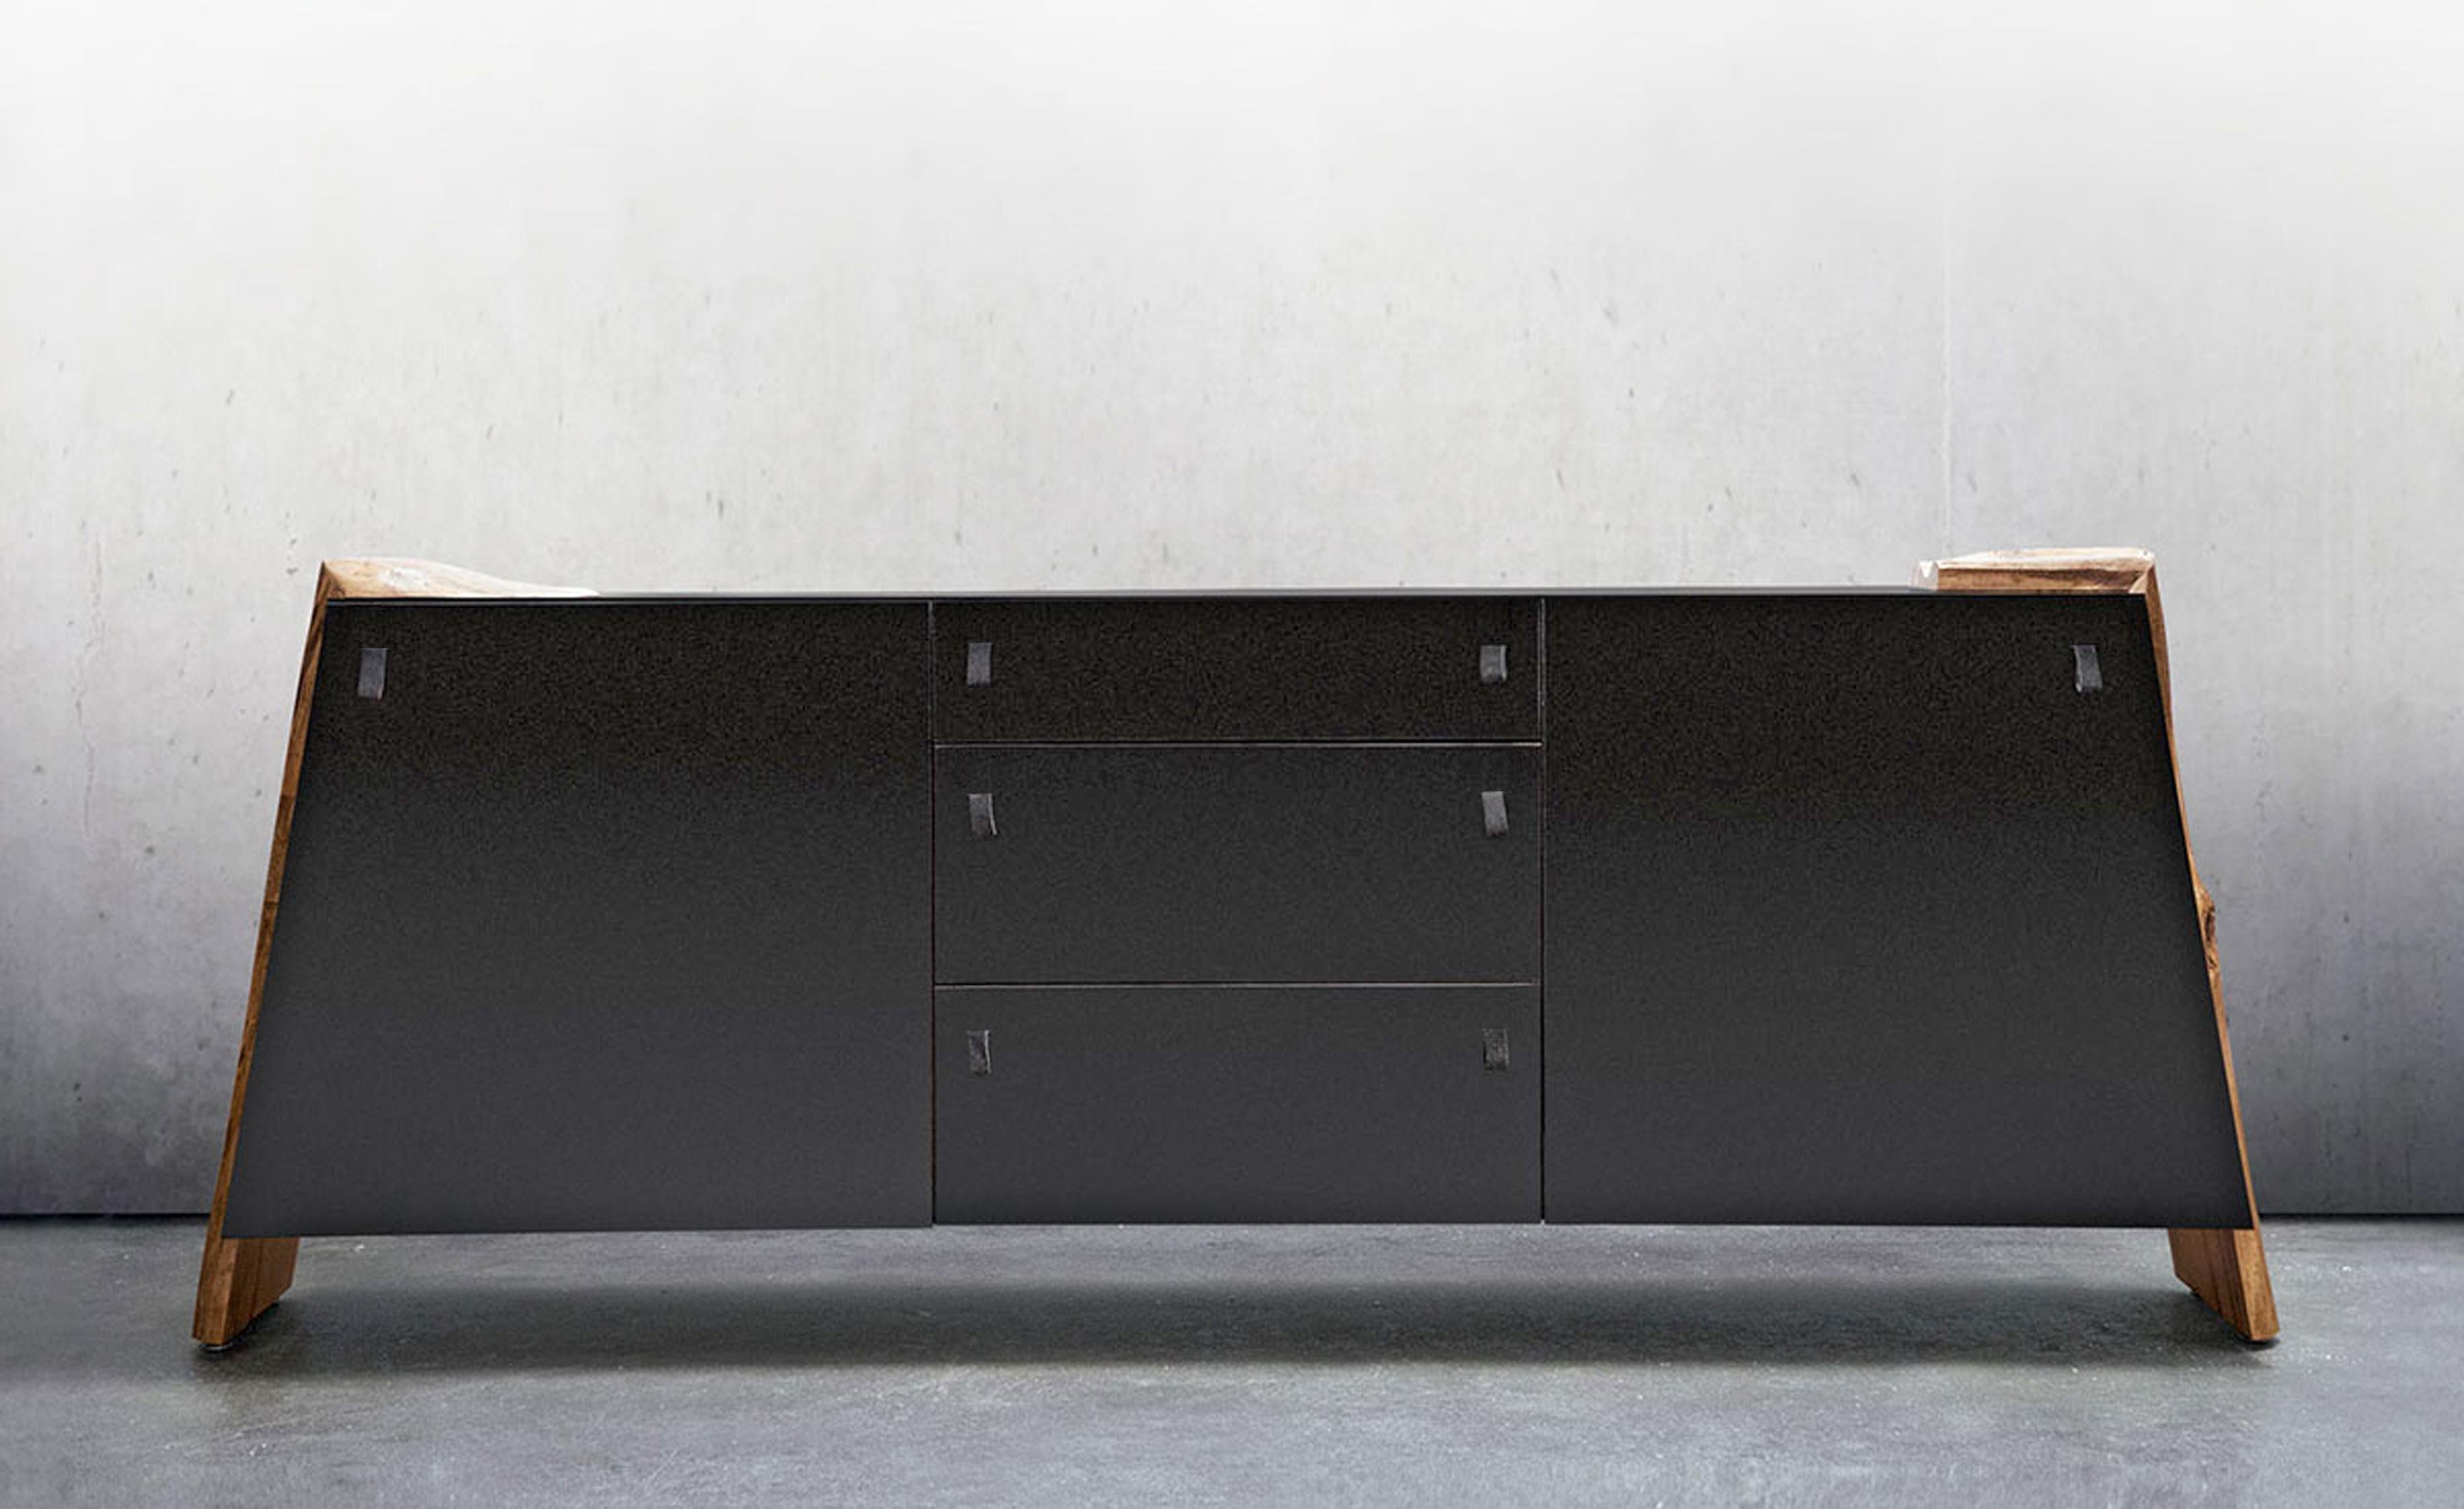 A tweaking of geometry and black finishes come together with live edge hardwood details to make an impressive statement. The Luxor credenza would make even a Pharaoh envious. Soft close hardware and leather pulls complete this piece of high